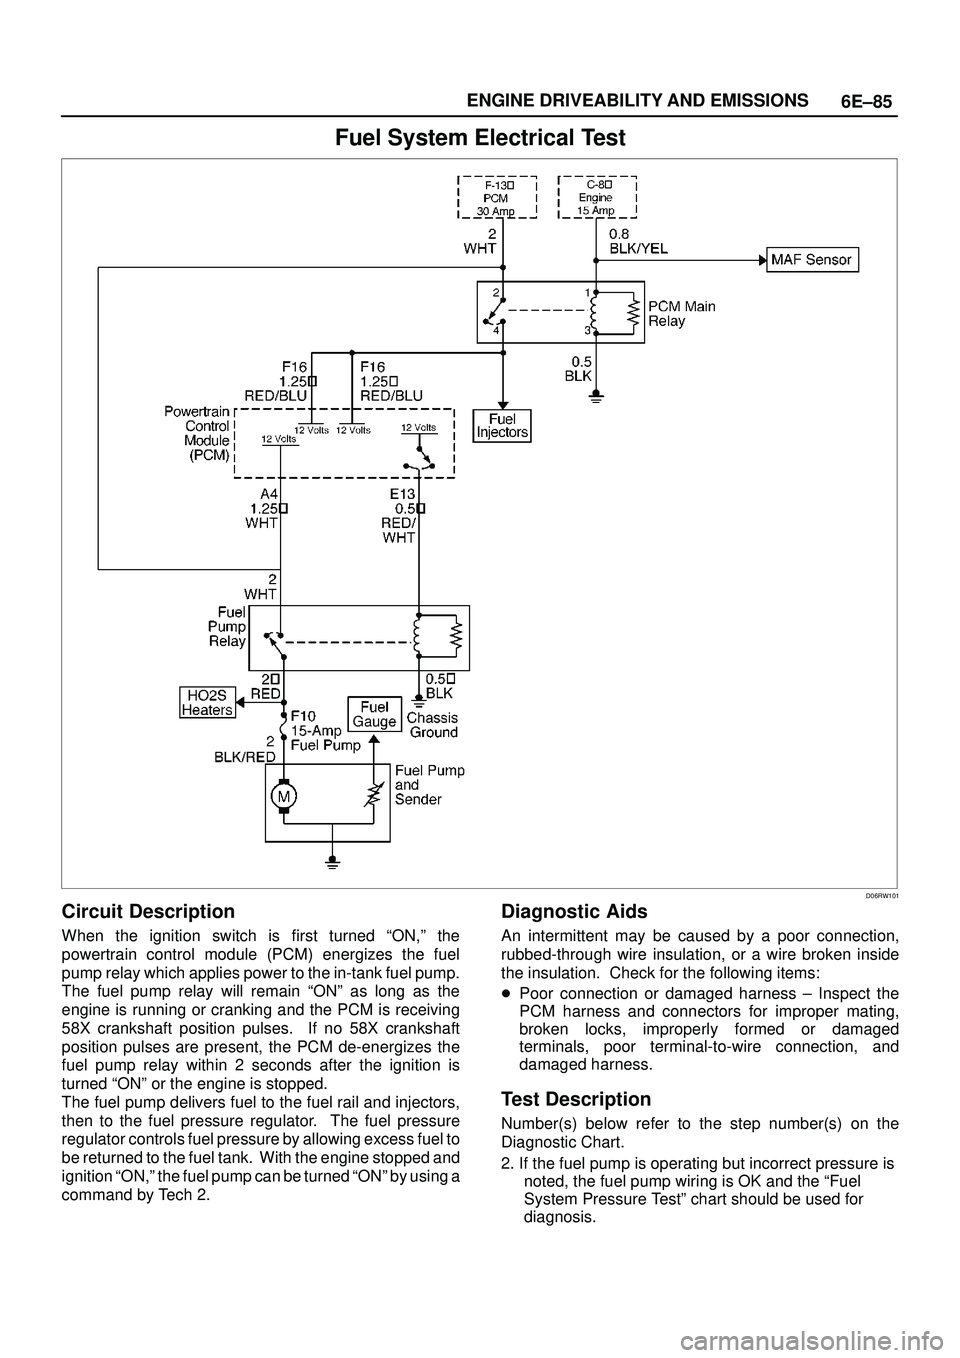 ISUZU TROOPER 1998  Service Owners Manual 6E±85 ENGINE DRIVEABILITY AND EMISSIONS
Fuel System Electrical Test
D06RW101
Circuit Description
When the ignition switch is first turned ªON,º the
powertrain control module (PCM) energizes the fue